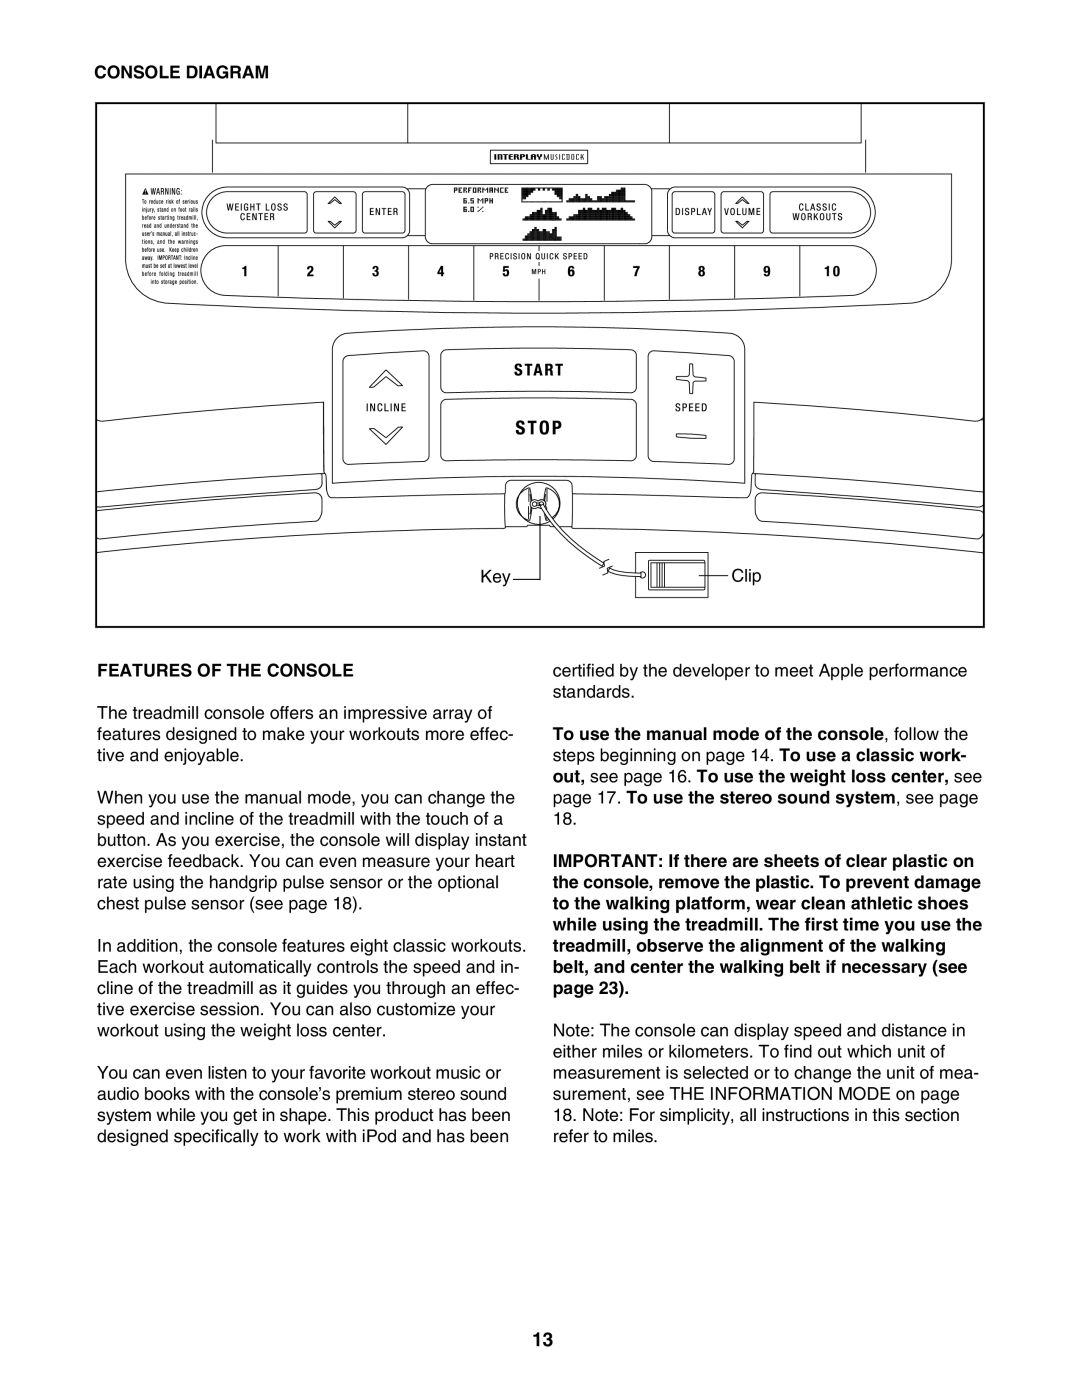 ProForm 620 user manual Console Diagram, Features of the Console 